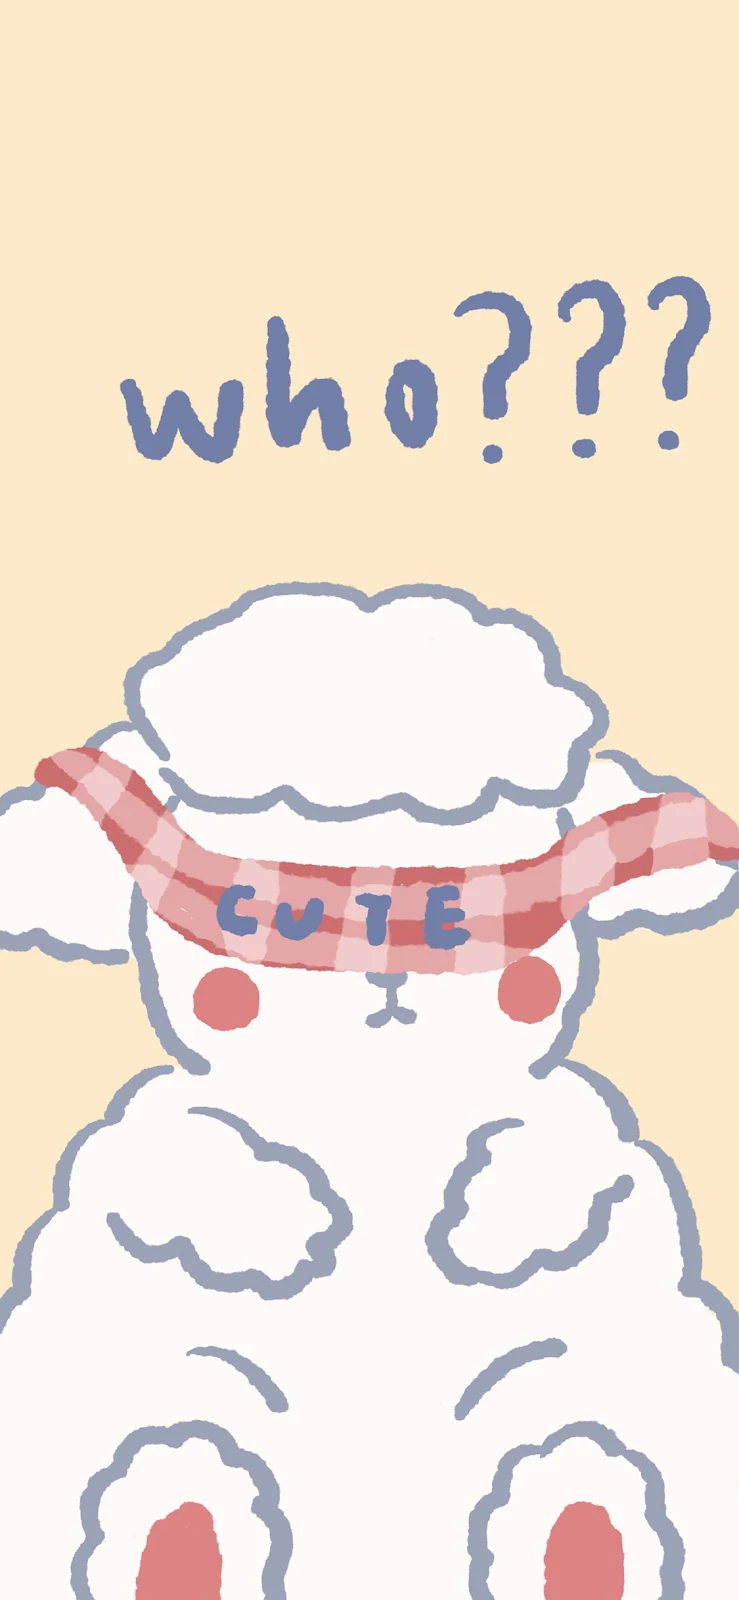 A Cool Cute Sheep Full HD iPhone Wallpaper for Free Download in High Quality [1125x2436]